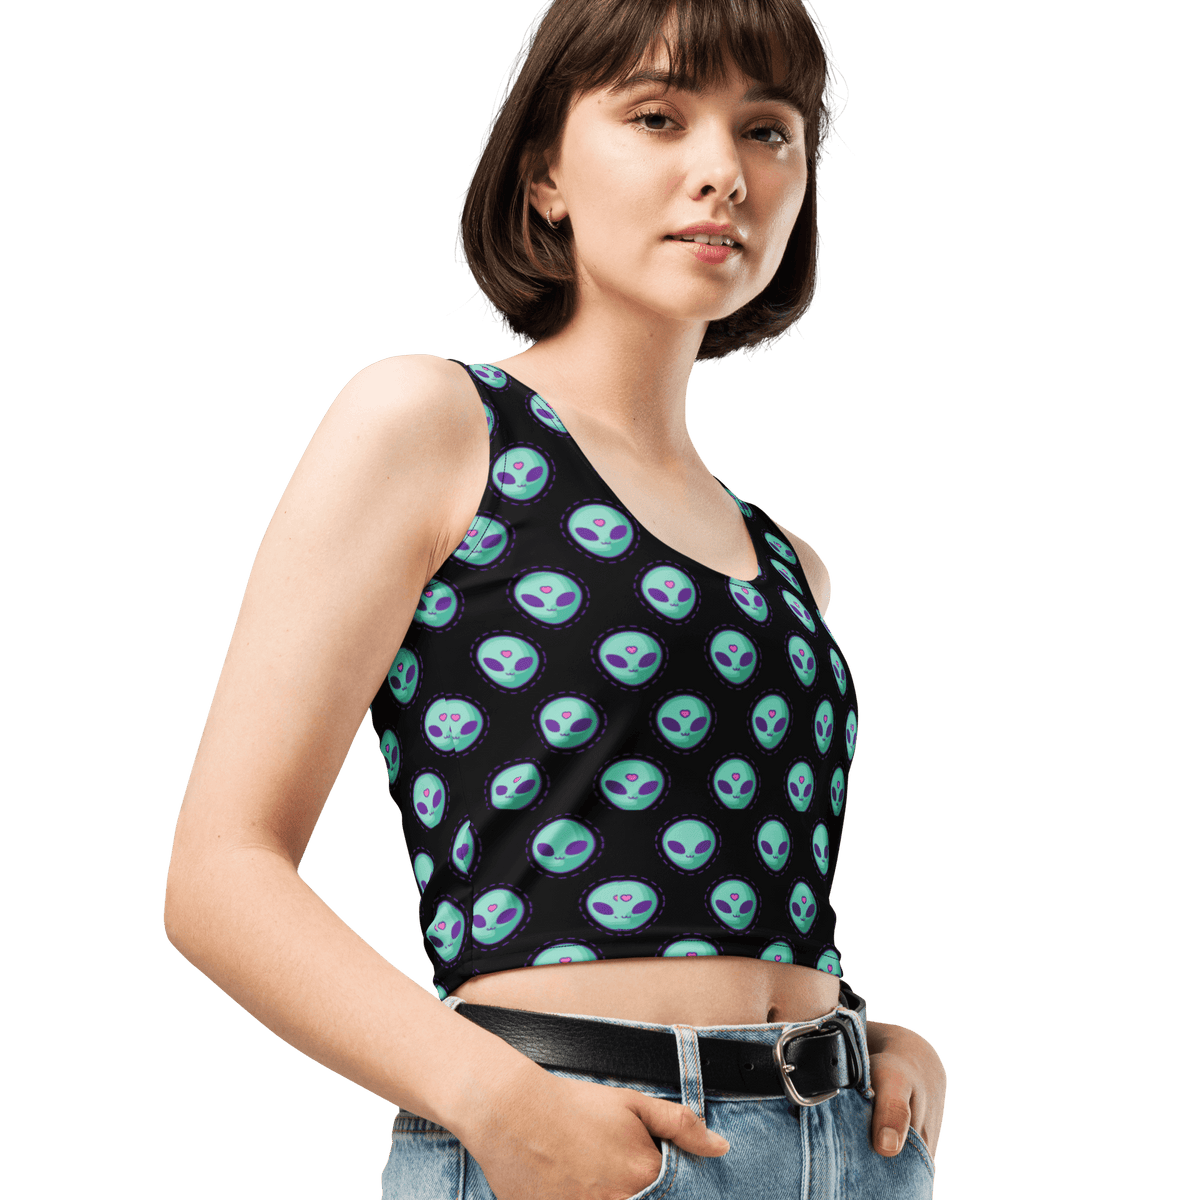 Alien Fashion, Cosmic Crop Top, Quirky Style, Extraterrestrial Trend, Crop Top Vibes, Space Inspired, Unique Print, Fashion Forward, Playful Aliens, Statement Piece